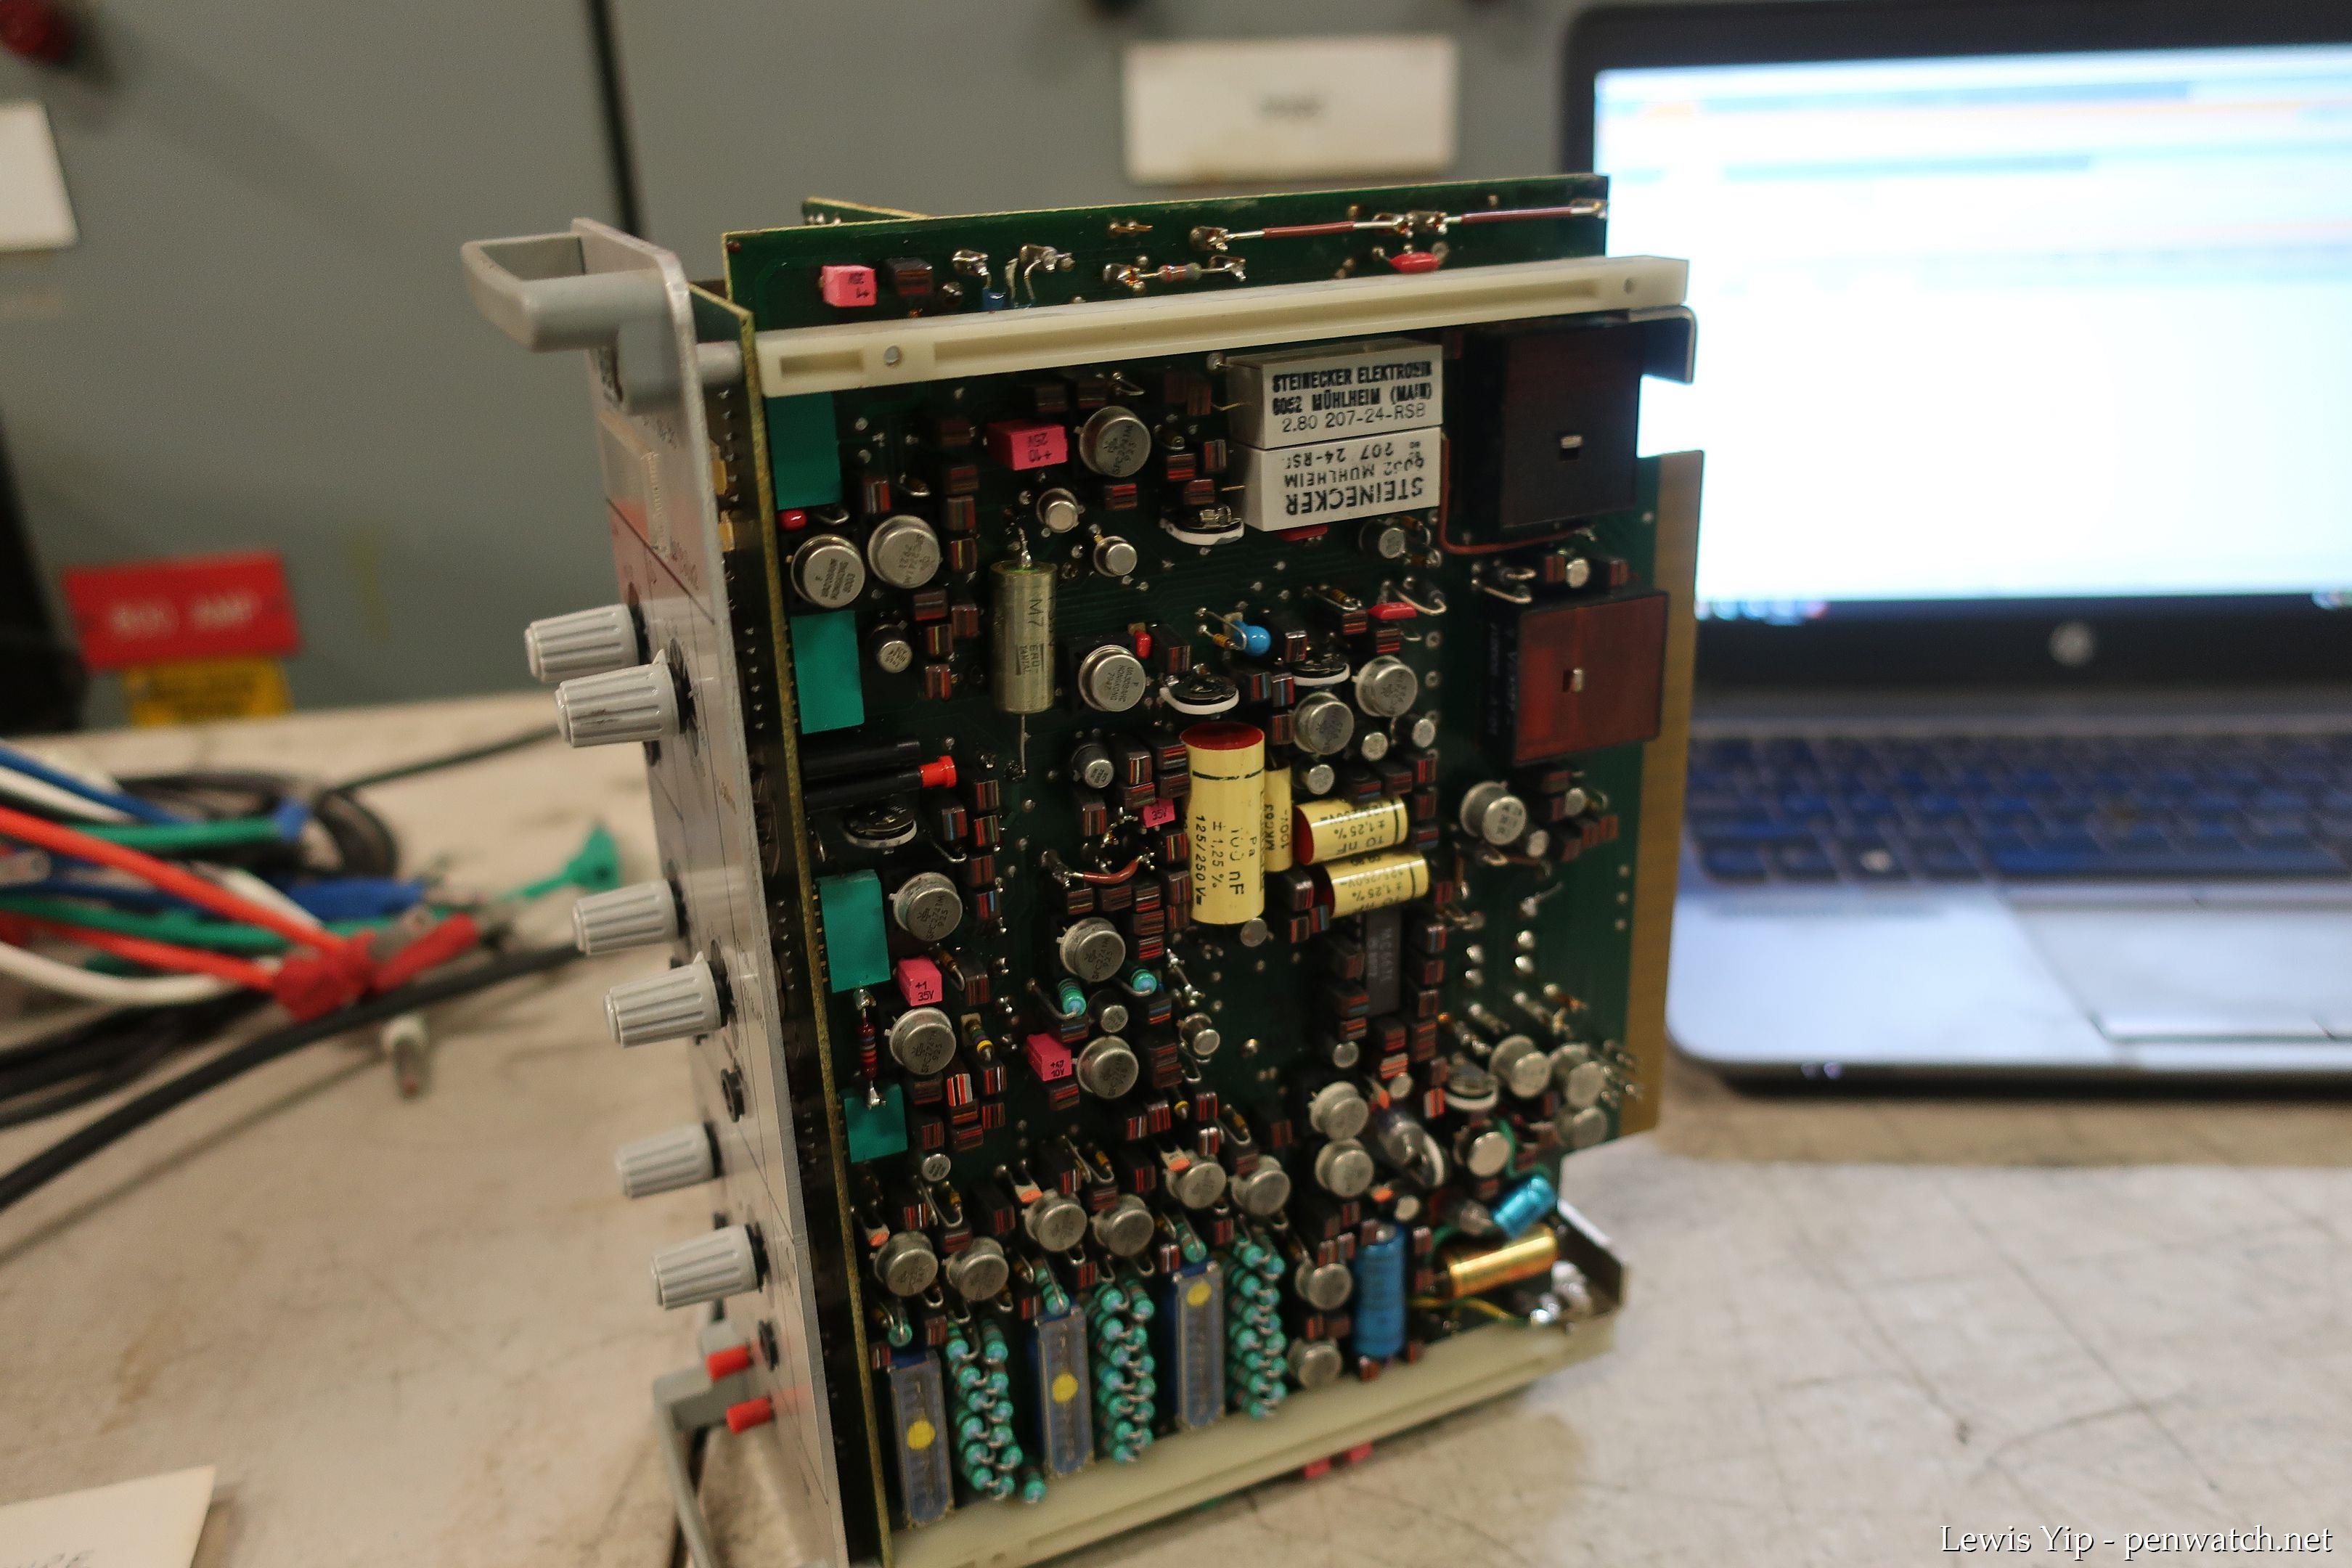 A side view of the BBC ITX 193 motor protection relay